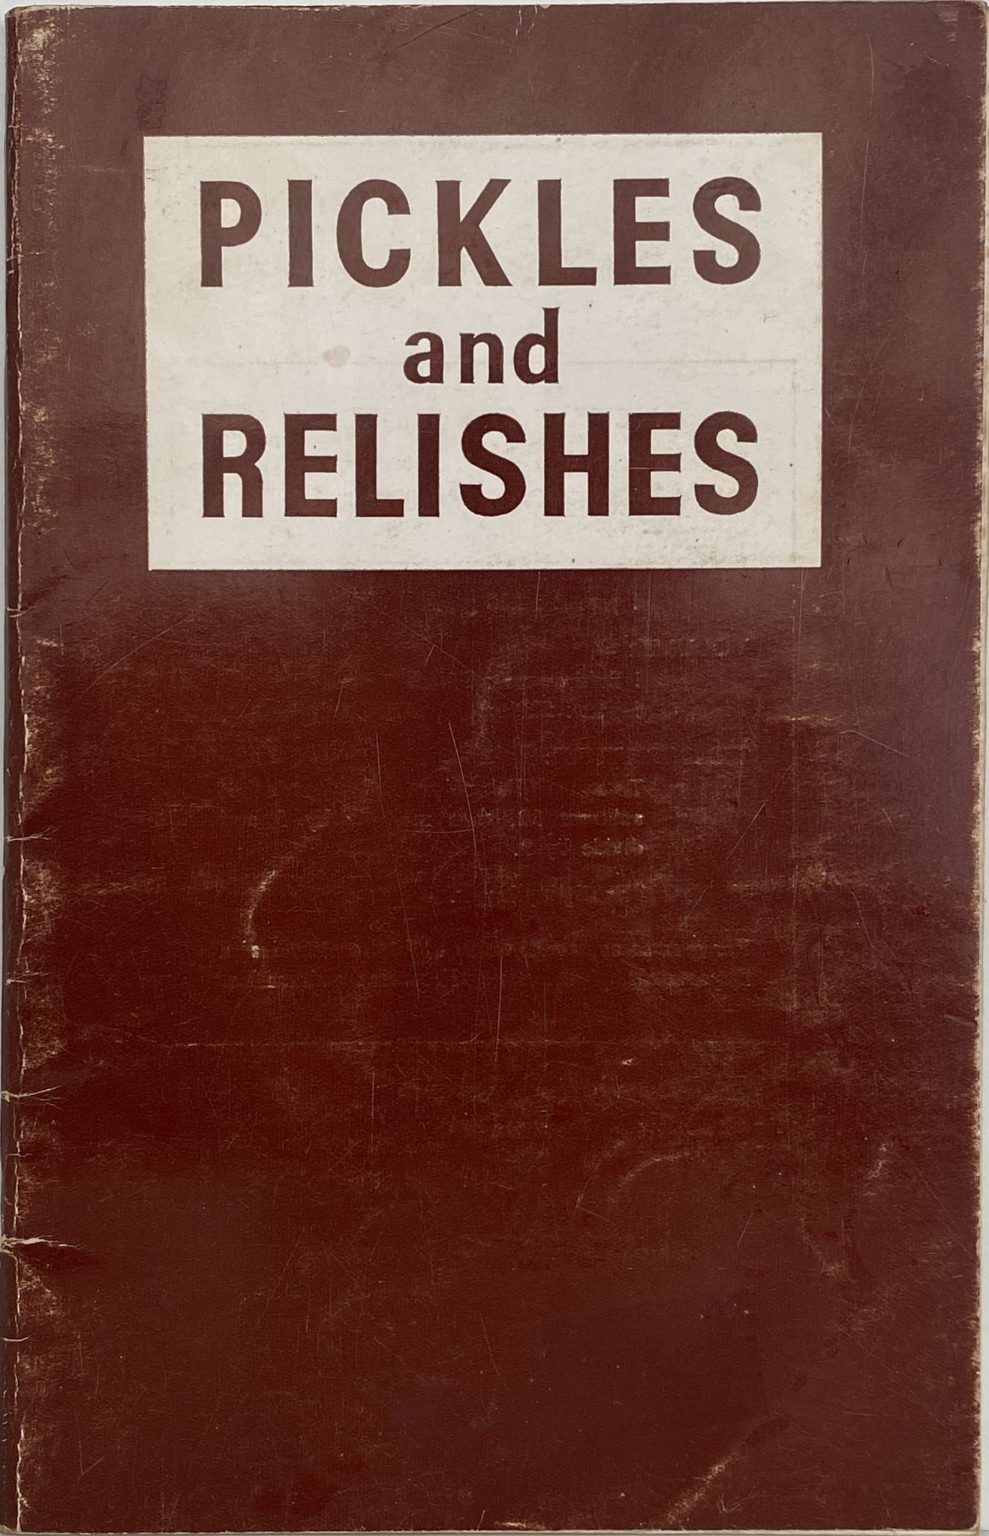 PICKLES AND RELISHES by Miss E. J. Howe 1971